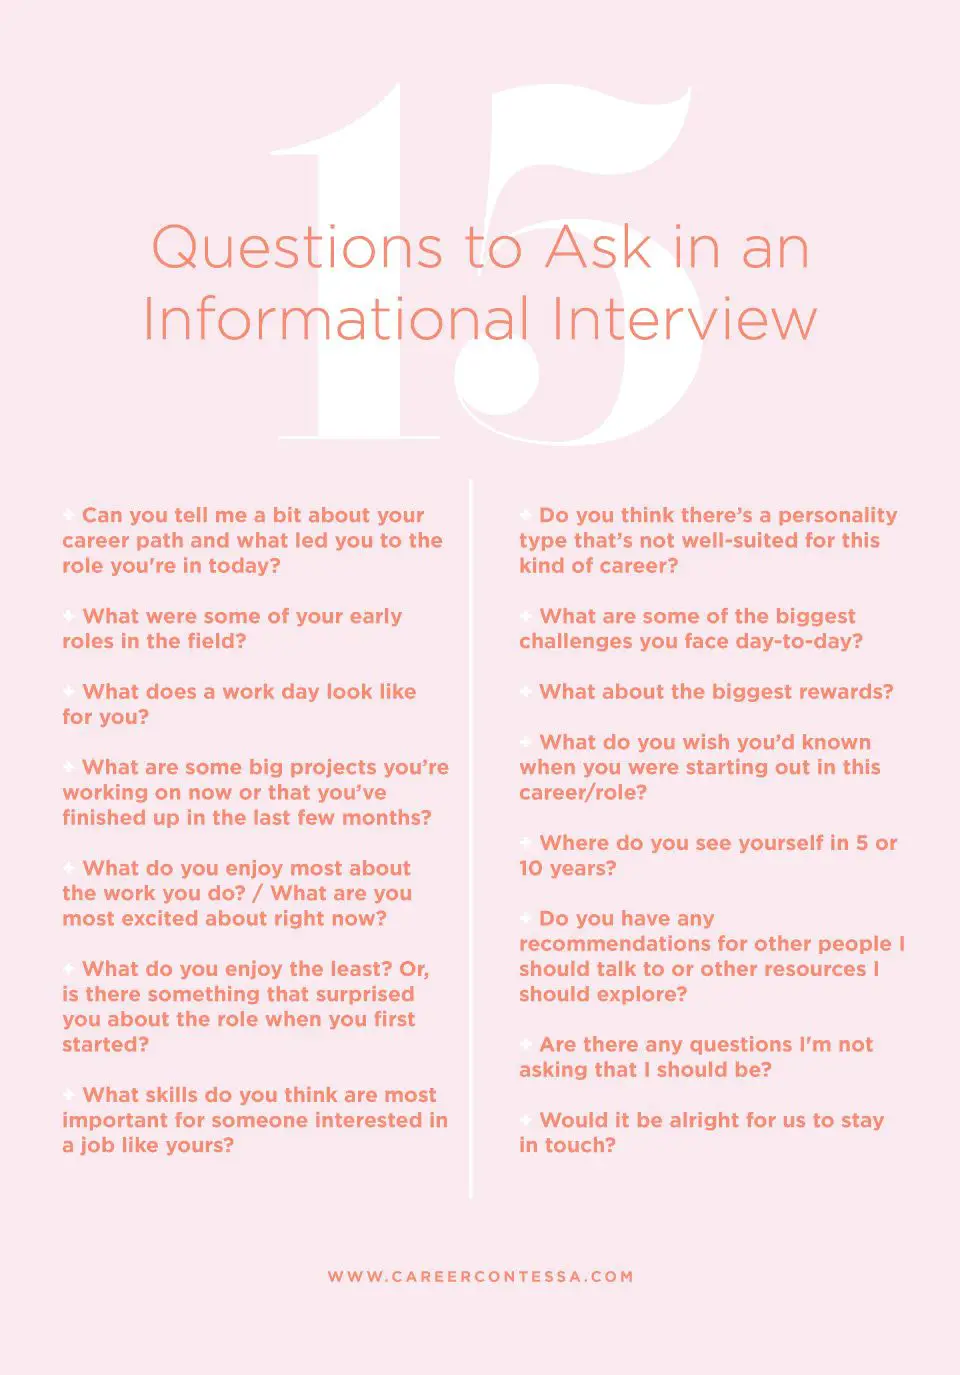 Questions to Ask Informational Interview